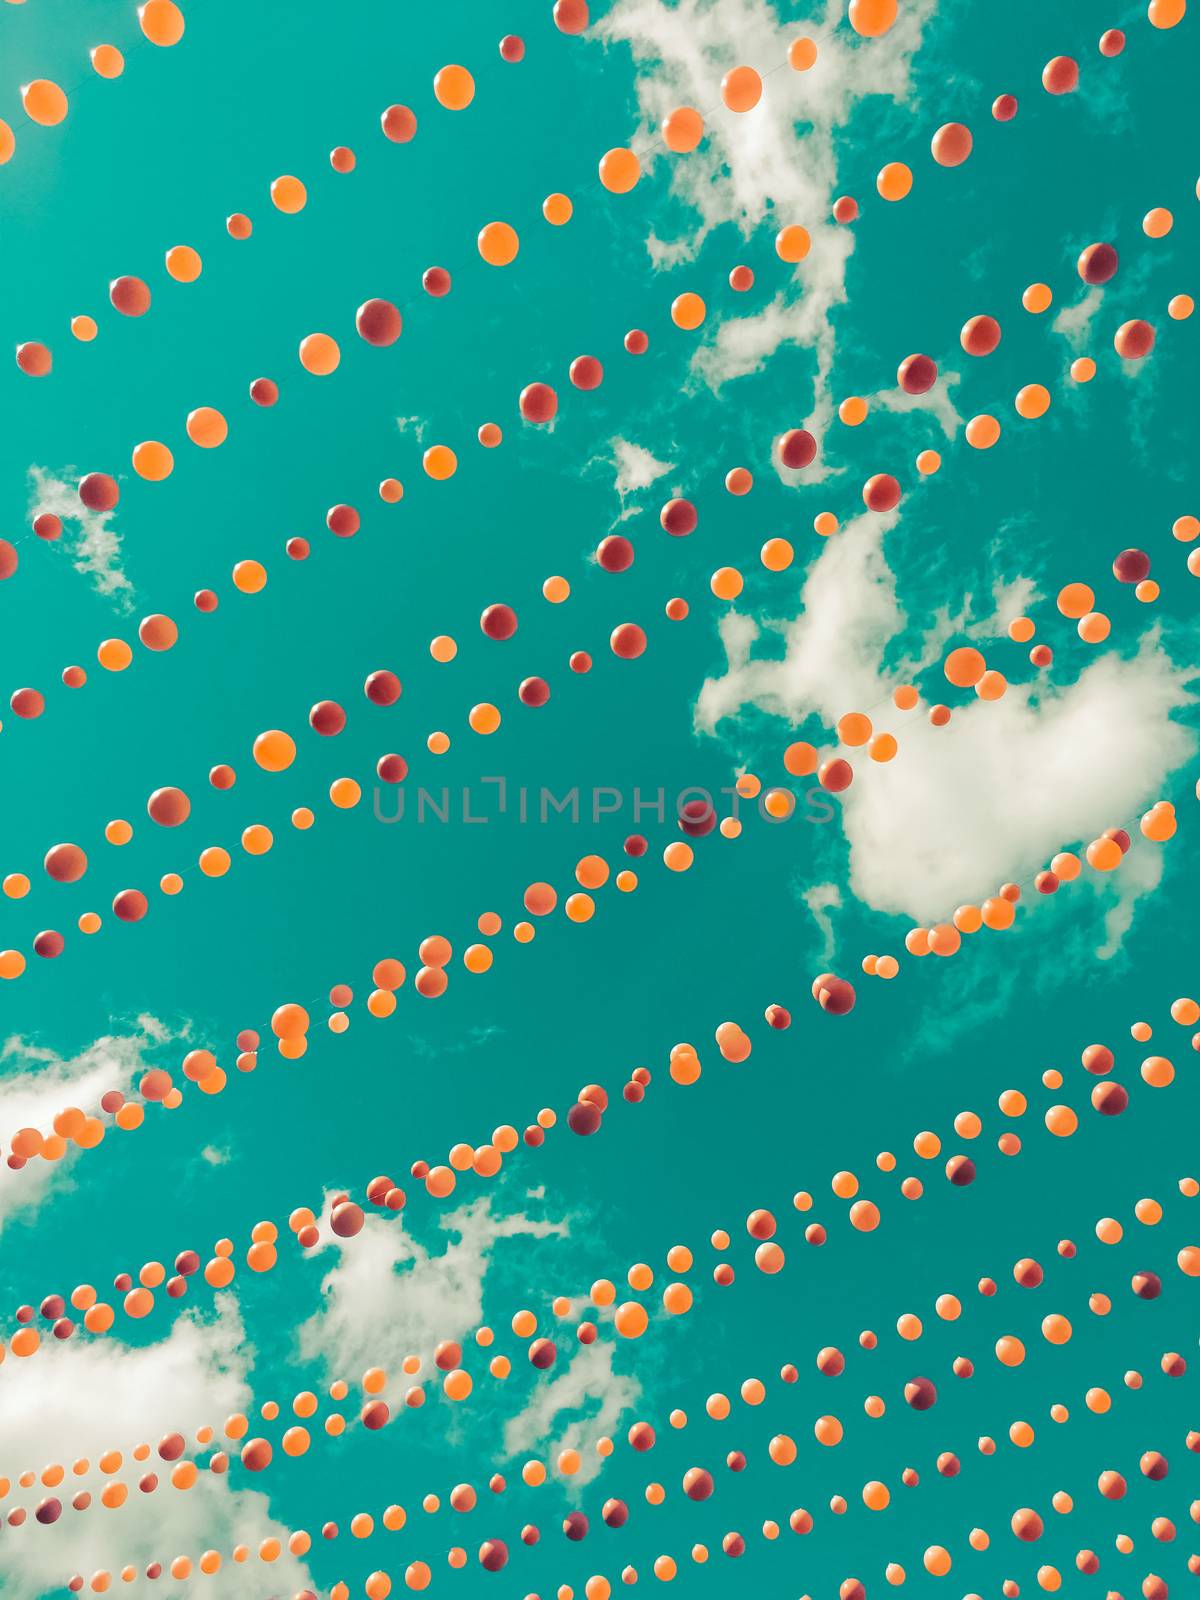 Vintage style image of colorful balls decoration against sky and by anikasalsera